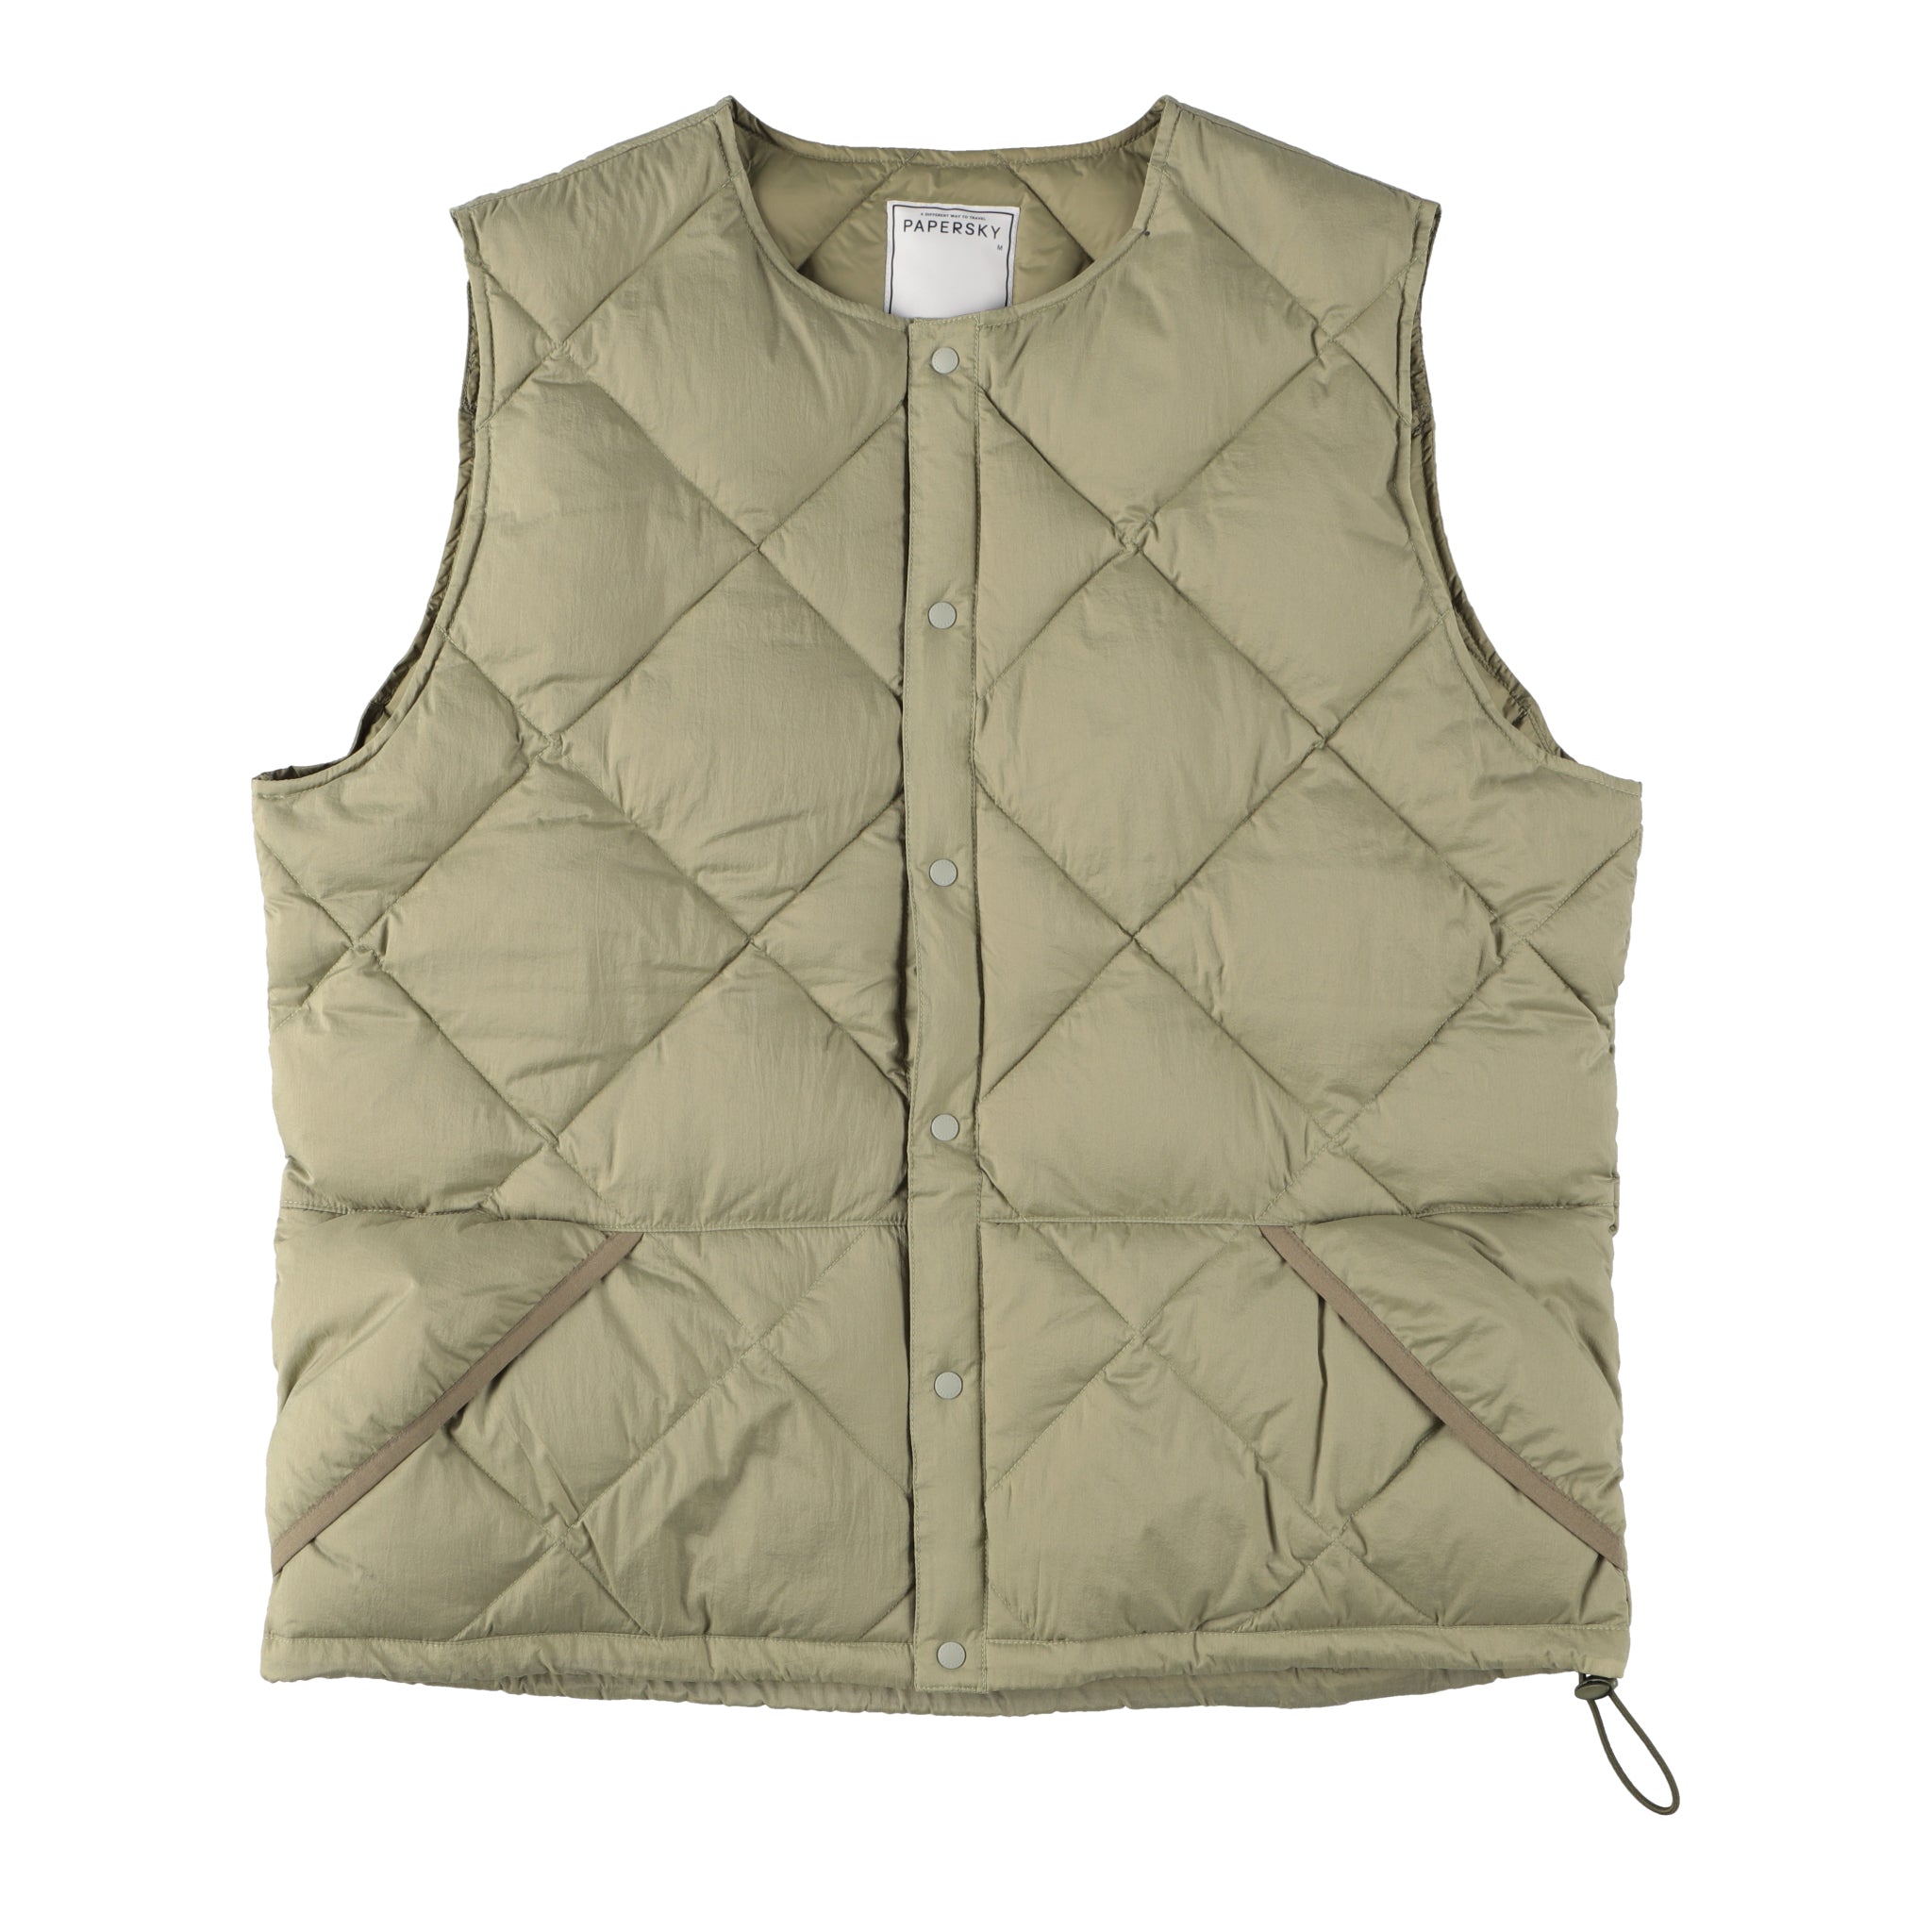 Middle Layer Down Vest- #67 (Light Khaki) – PAPERSKY WEAR STORE